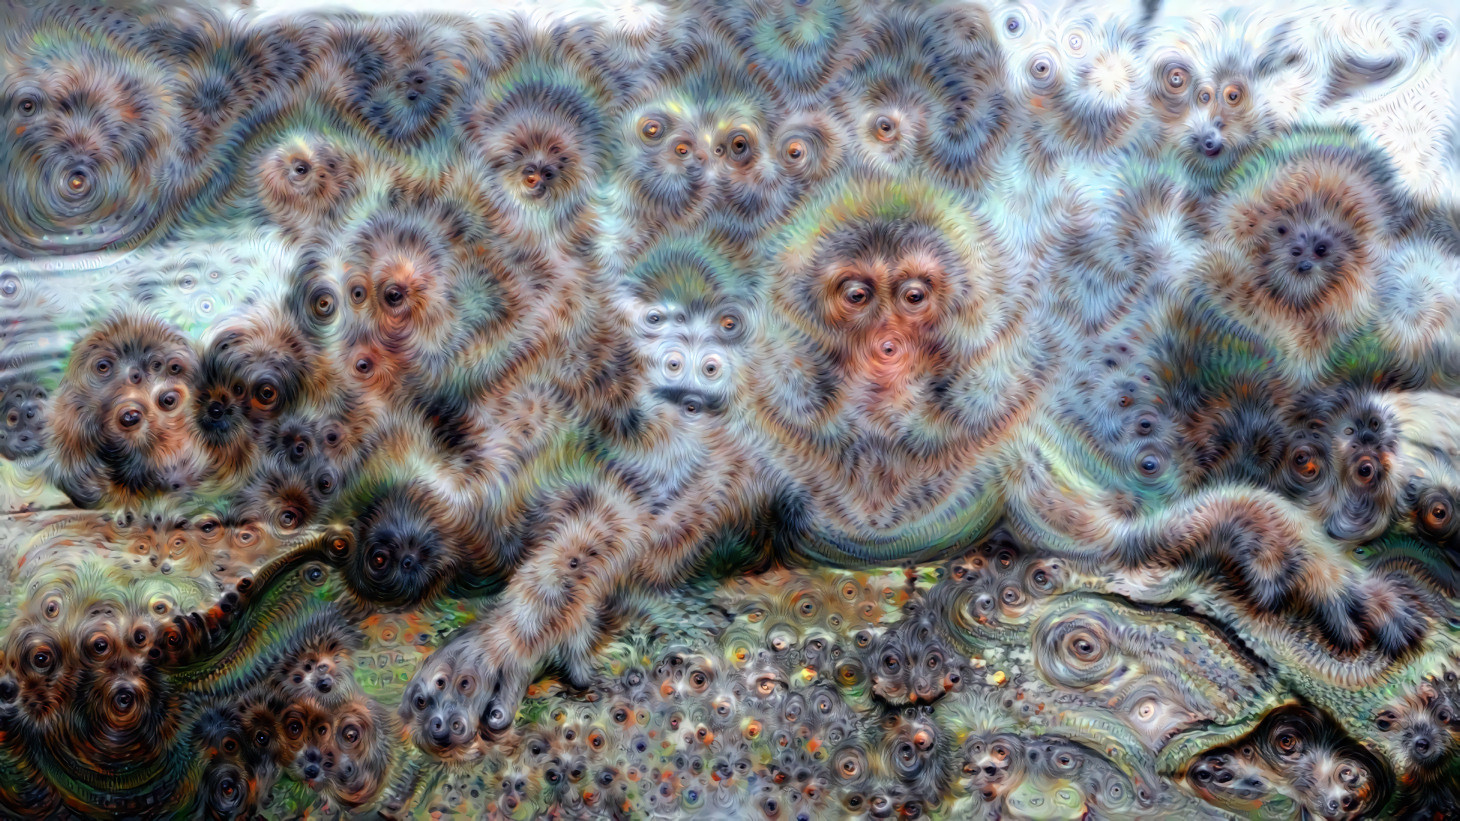 Spa Day With Deep Dreaming Japanese Macaques